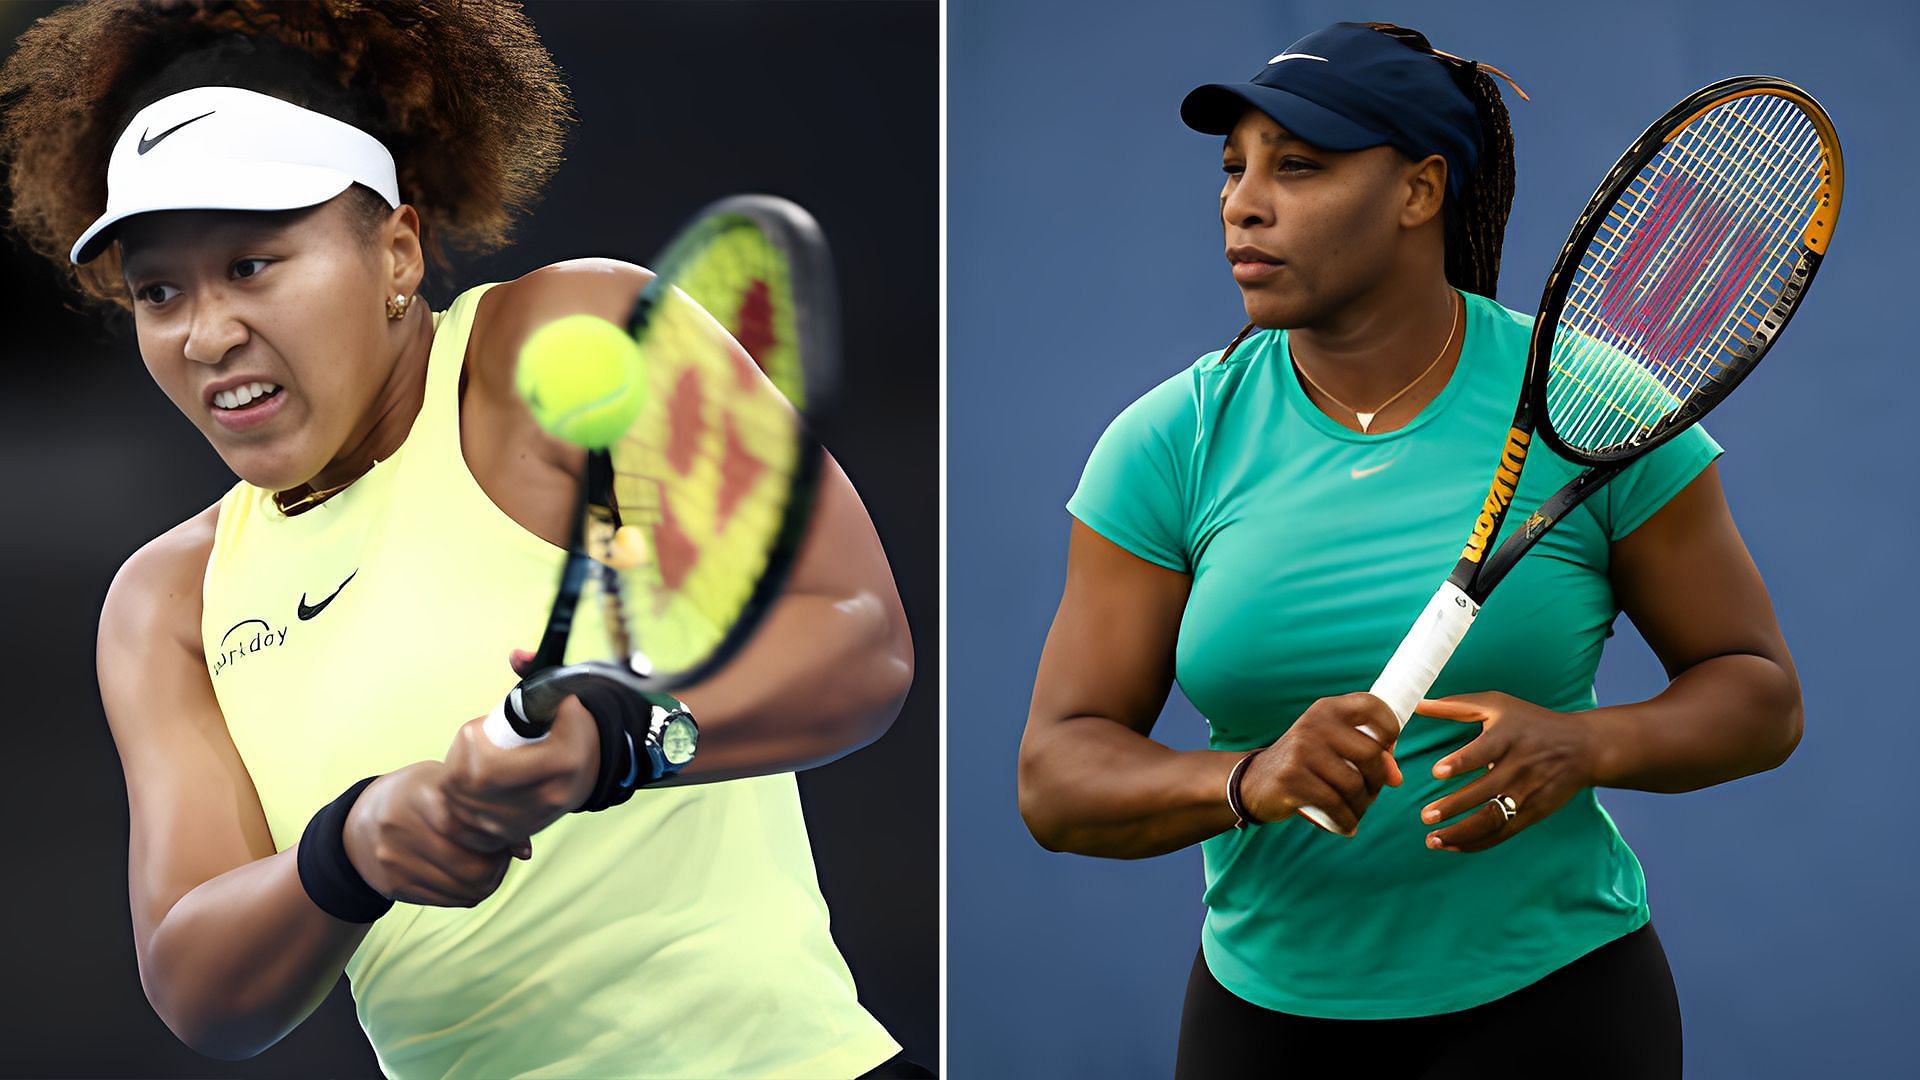 Can Naomi Osaka achieve what Serena Williams couldn't: Winning a Grand Slam title post motherhood?